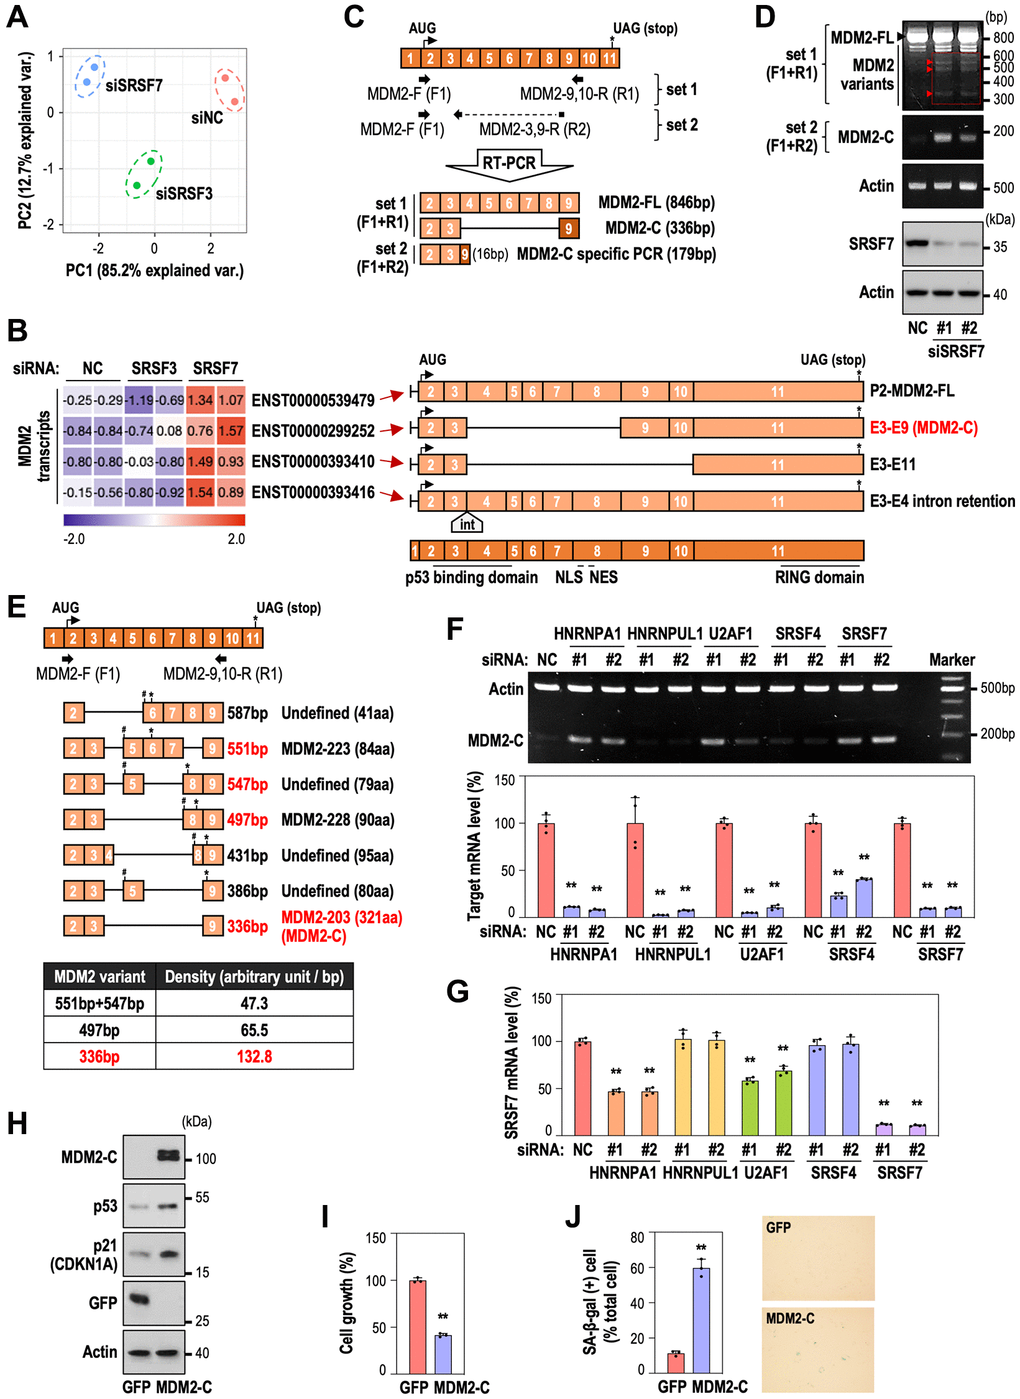 SRSF7 depletion modulates MDM2-C expression via alternative splicing. (A, B) RNA seq analysis. HDFs (DT2) were transfected with siRNA against either NC or SRSF3 or SRSF7 for 3 days. (A) Principal component analysis. (B) A heatmap of MDM2 transcripts, along with the schematic of each transcript. The values are scaled into z-score. Abbreviations: int: intron; NLS: nuclear localization signal; NES: nuclear export signal. (C) A diagram of exon composition of MDM2-FL with primer positions and exon numbers according to the updated MDM2 gene information (NM